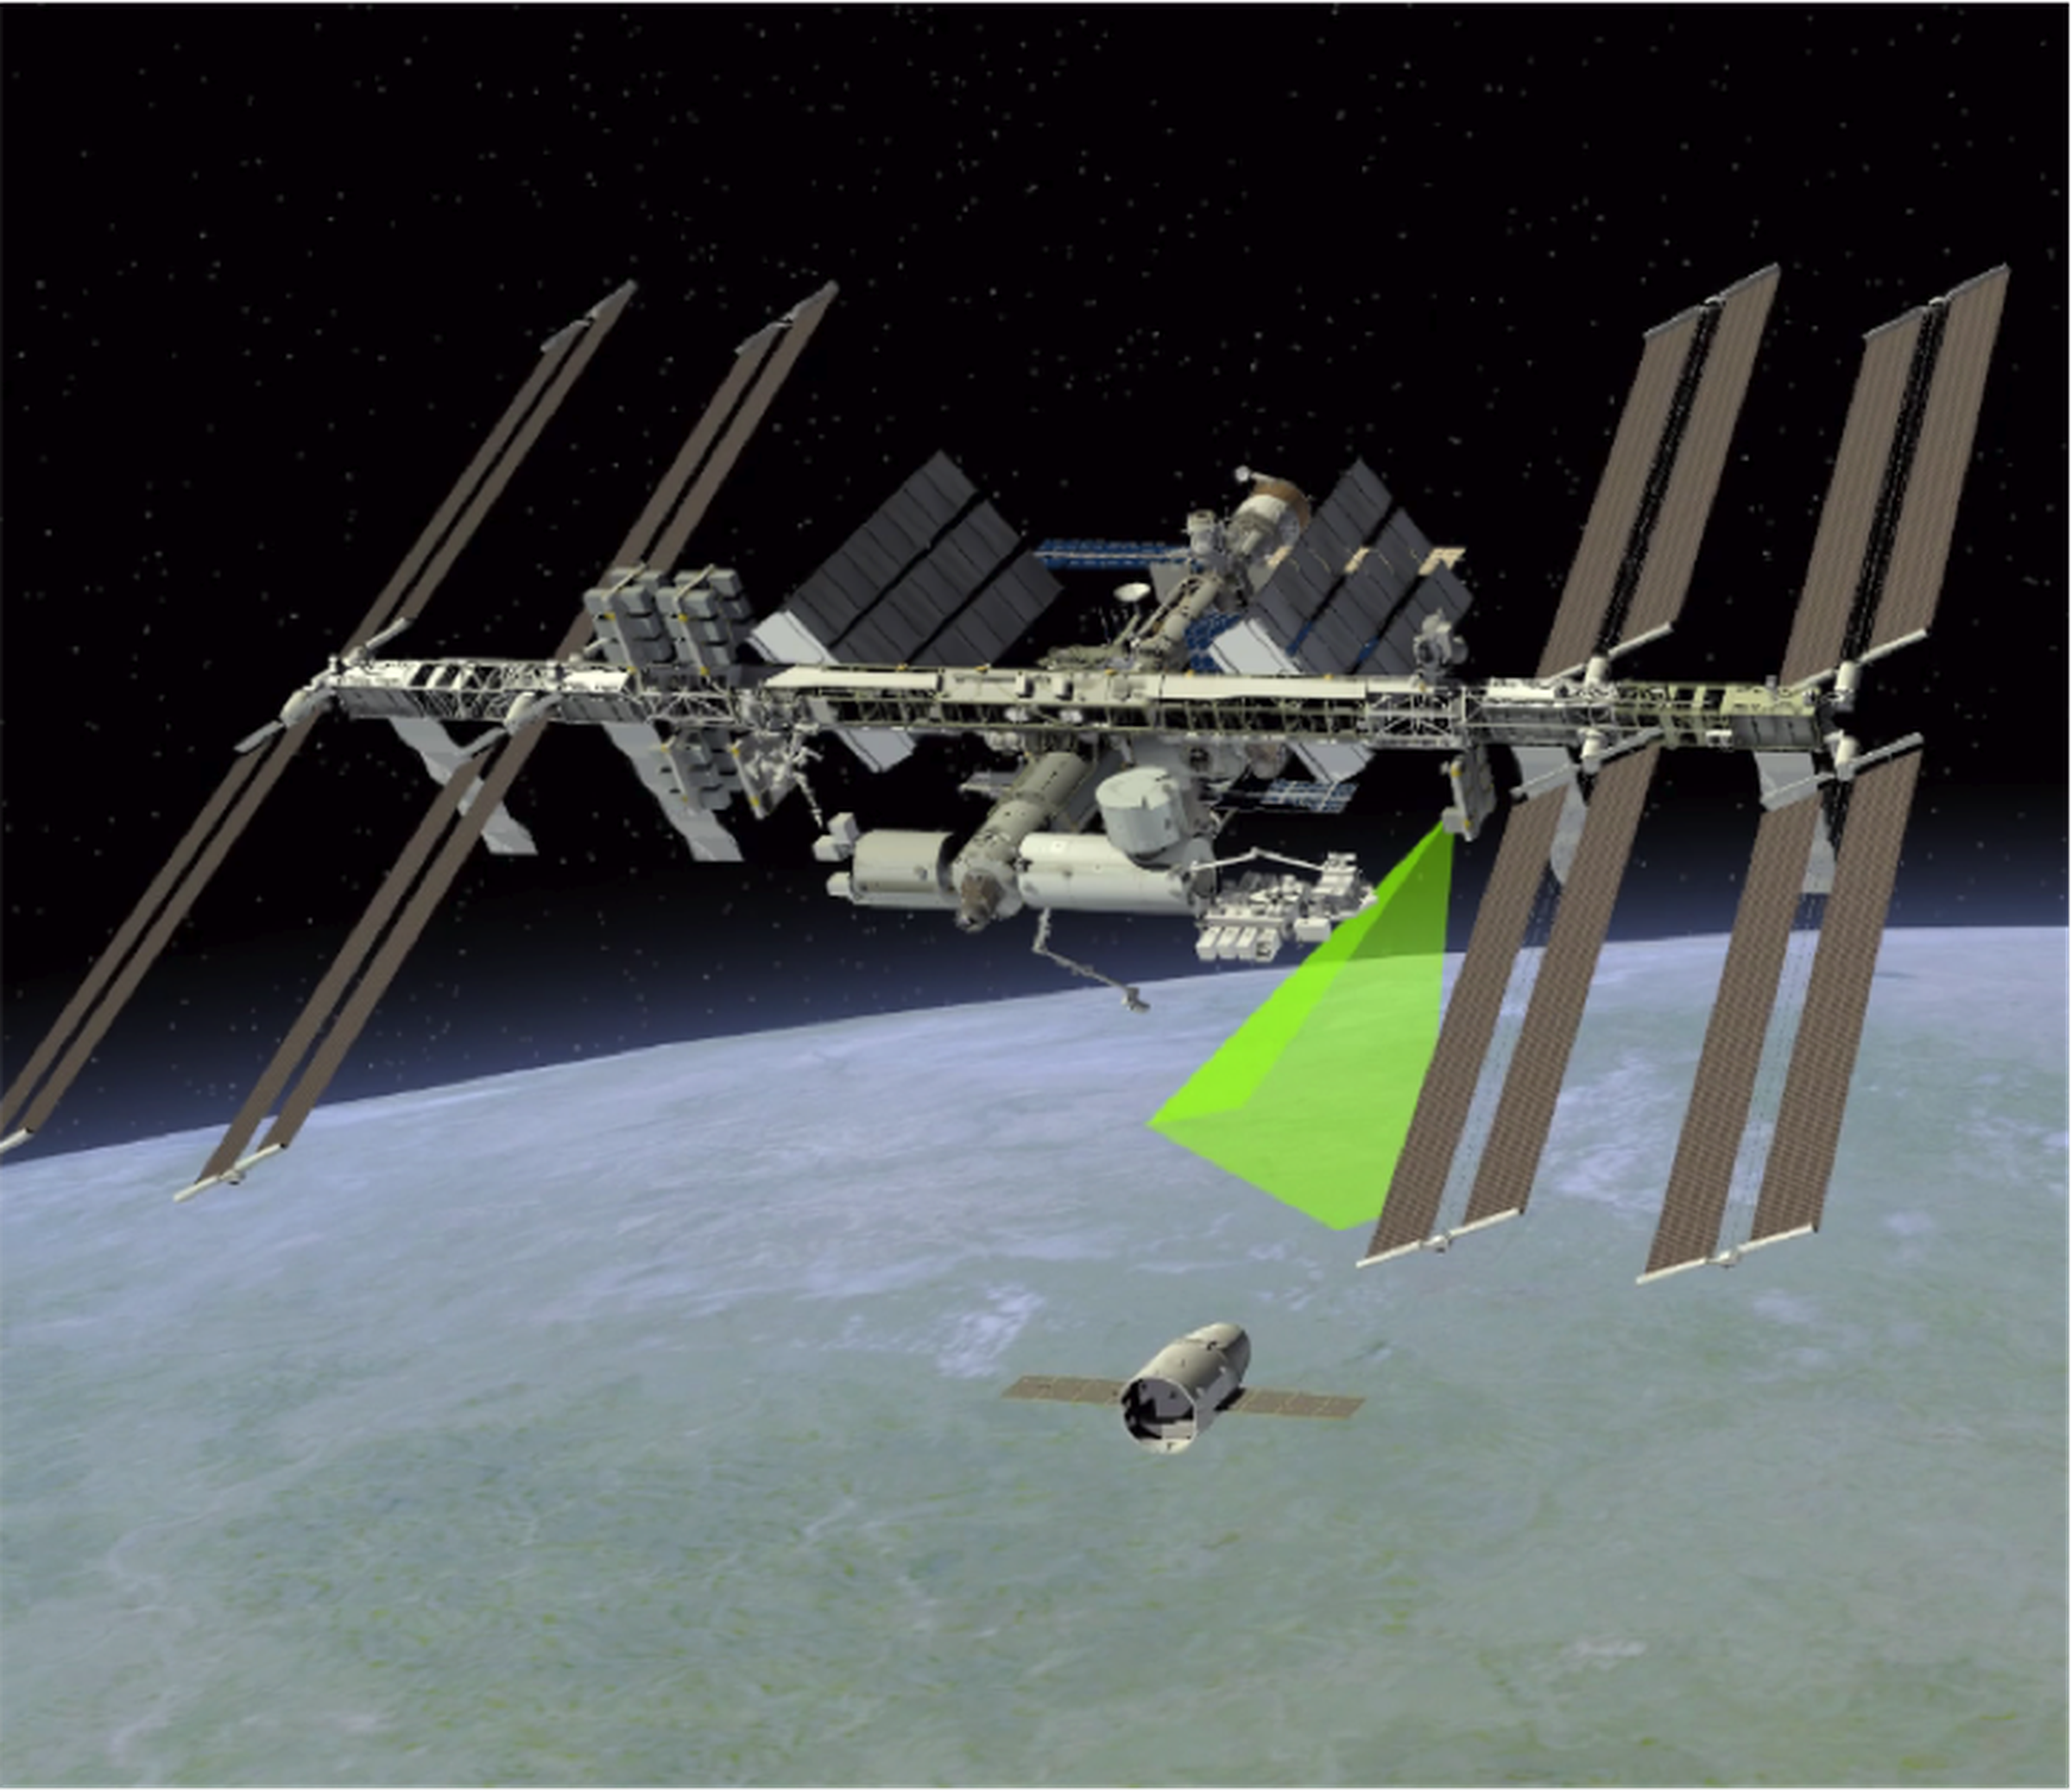 A rendering of the Raven module tracking an incoming vehicle at the International Space Station.